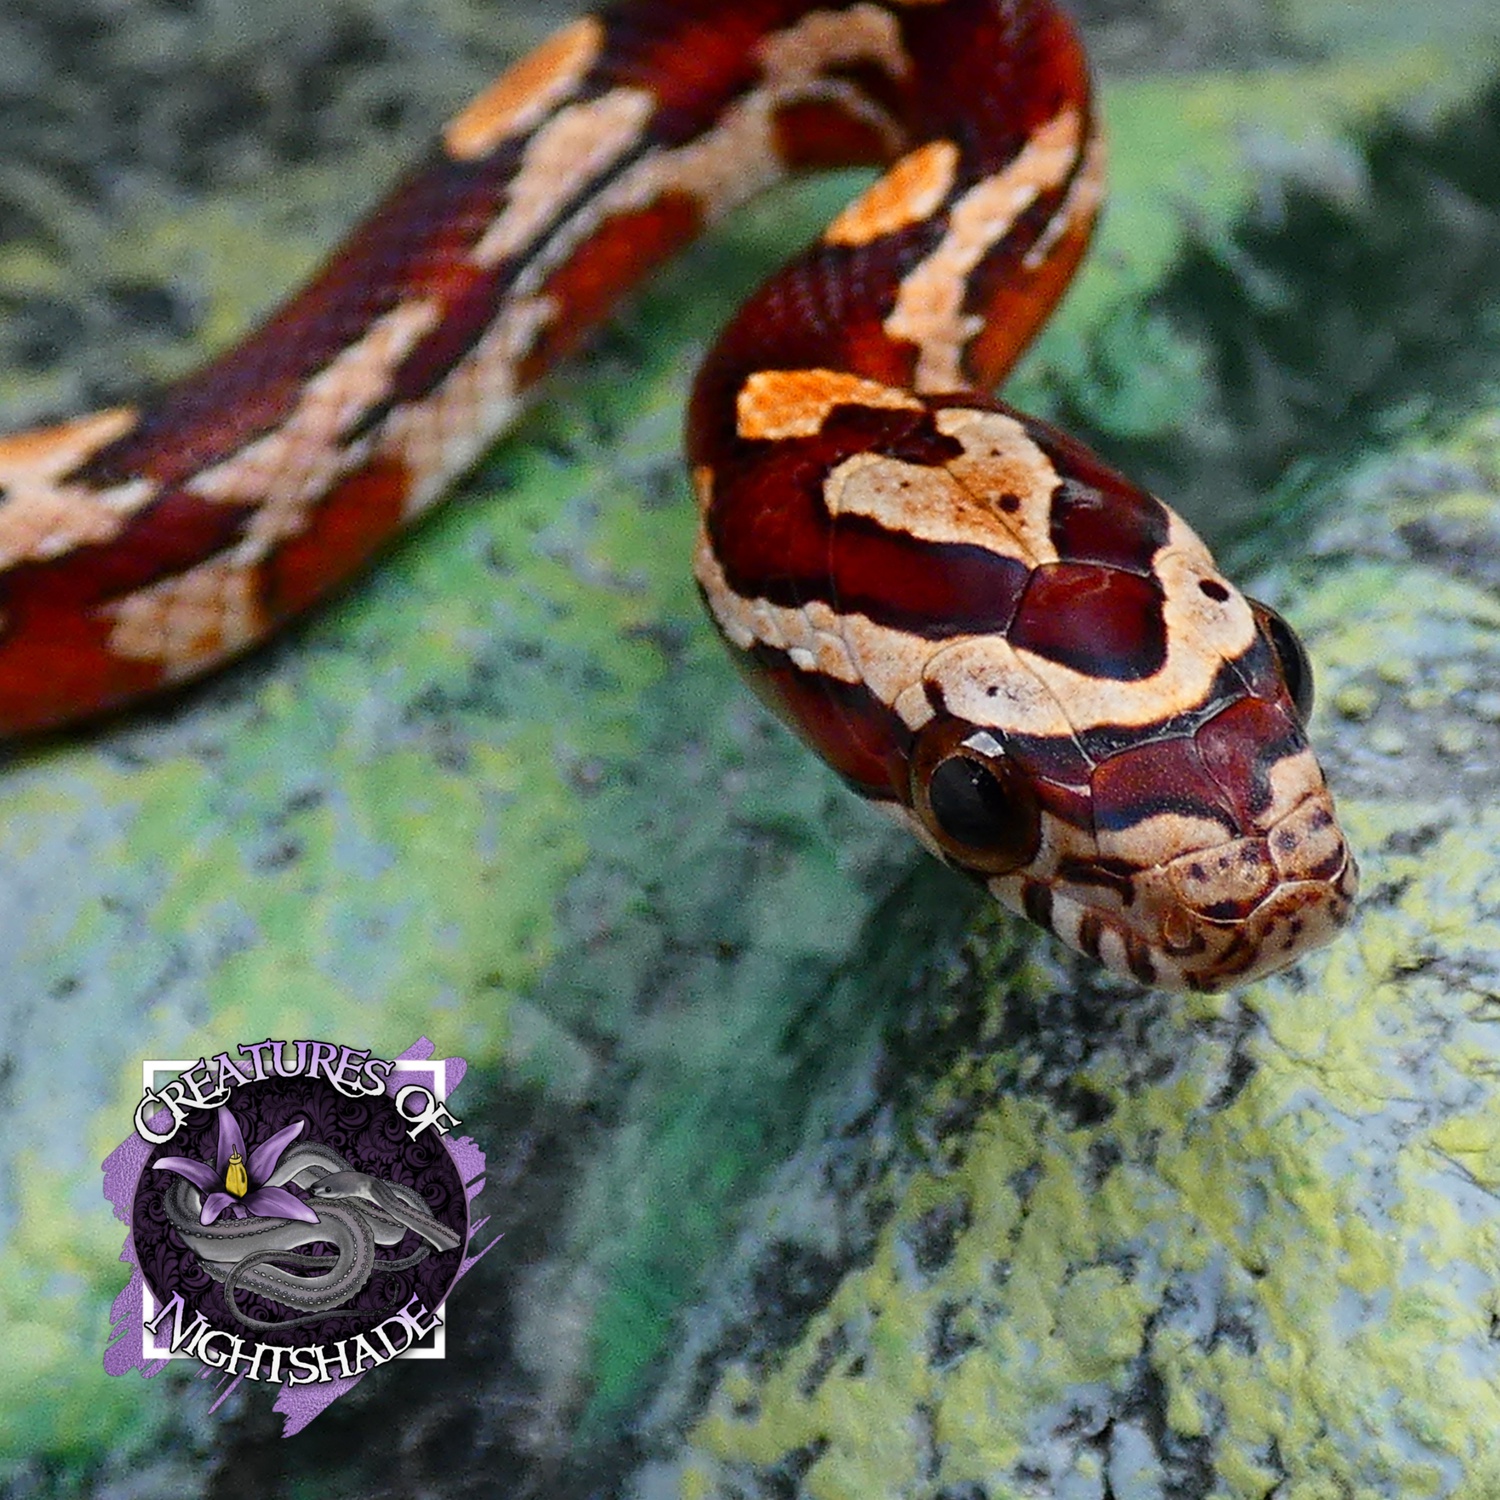 Classic Corn Snake by Creatures of Nightshade